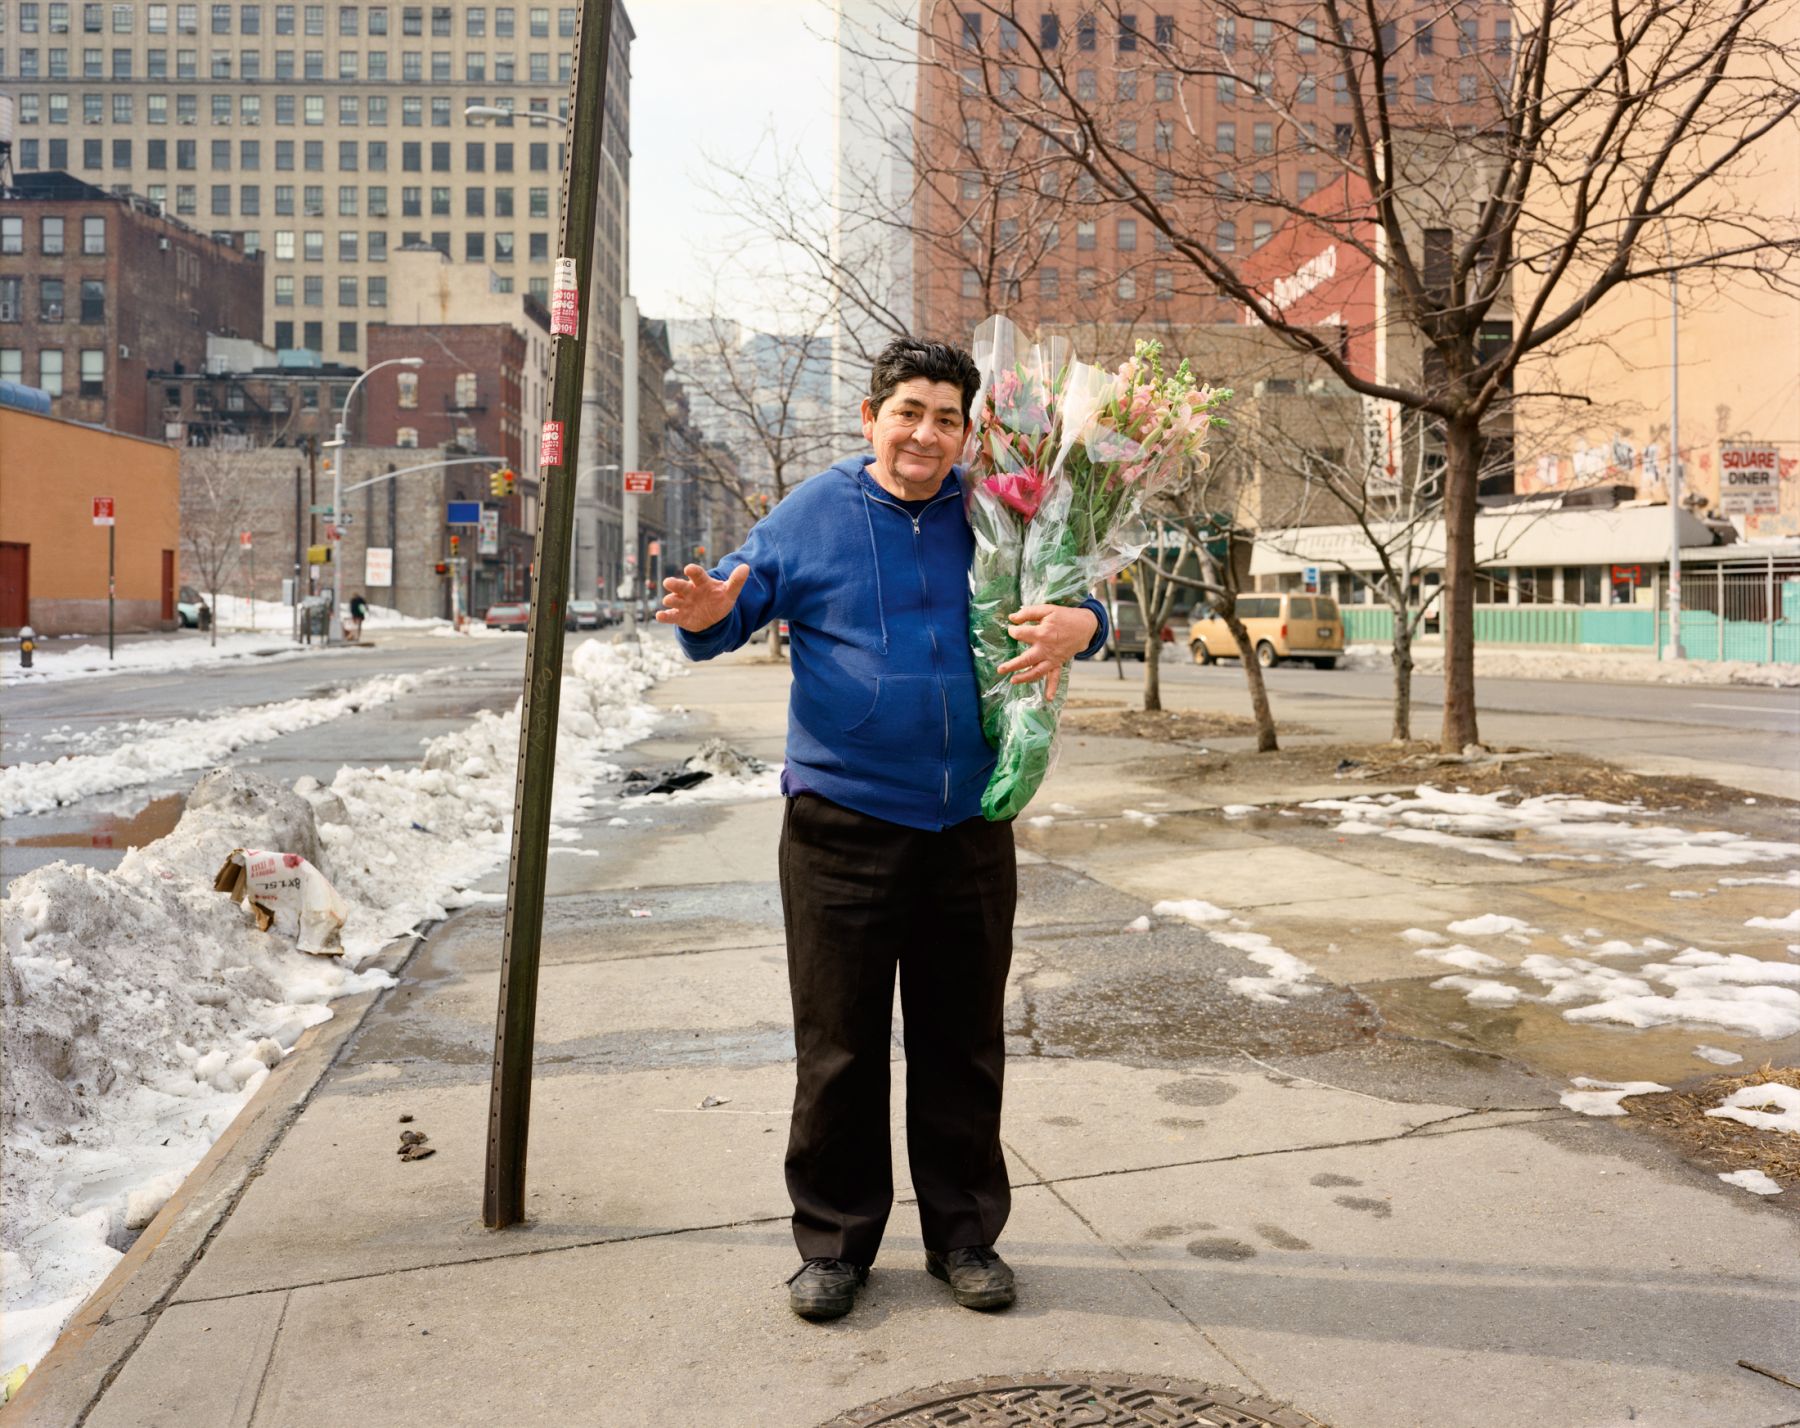 2_A Man Delivering Flowers, New York, New York, March 1994.jpeg